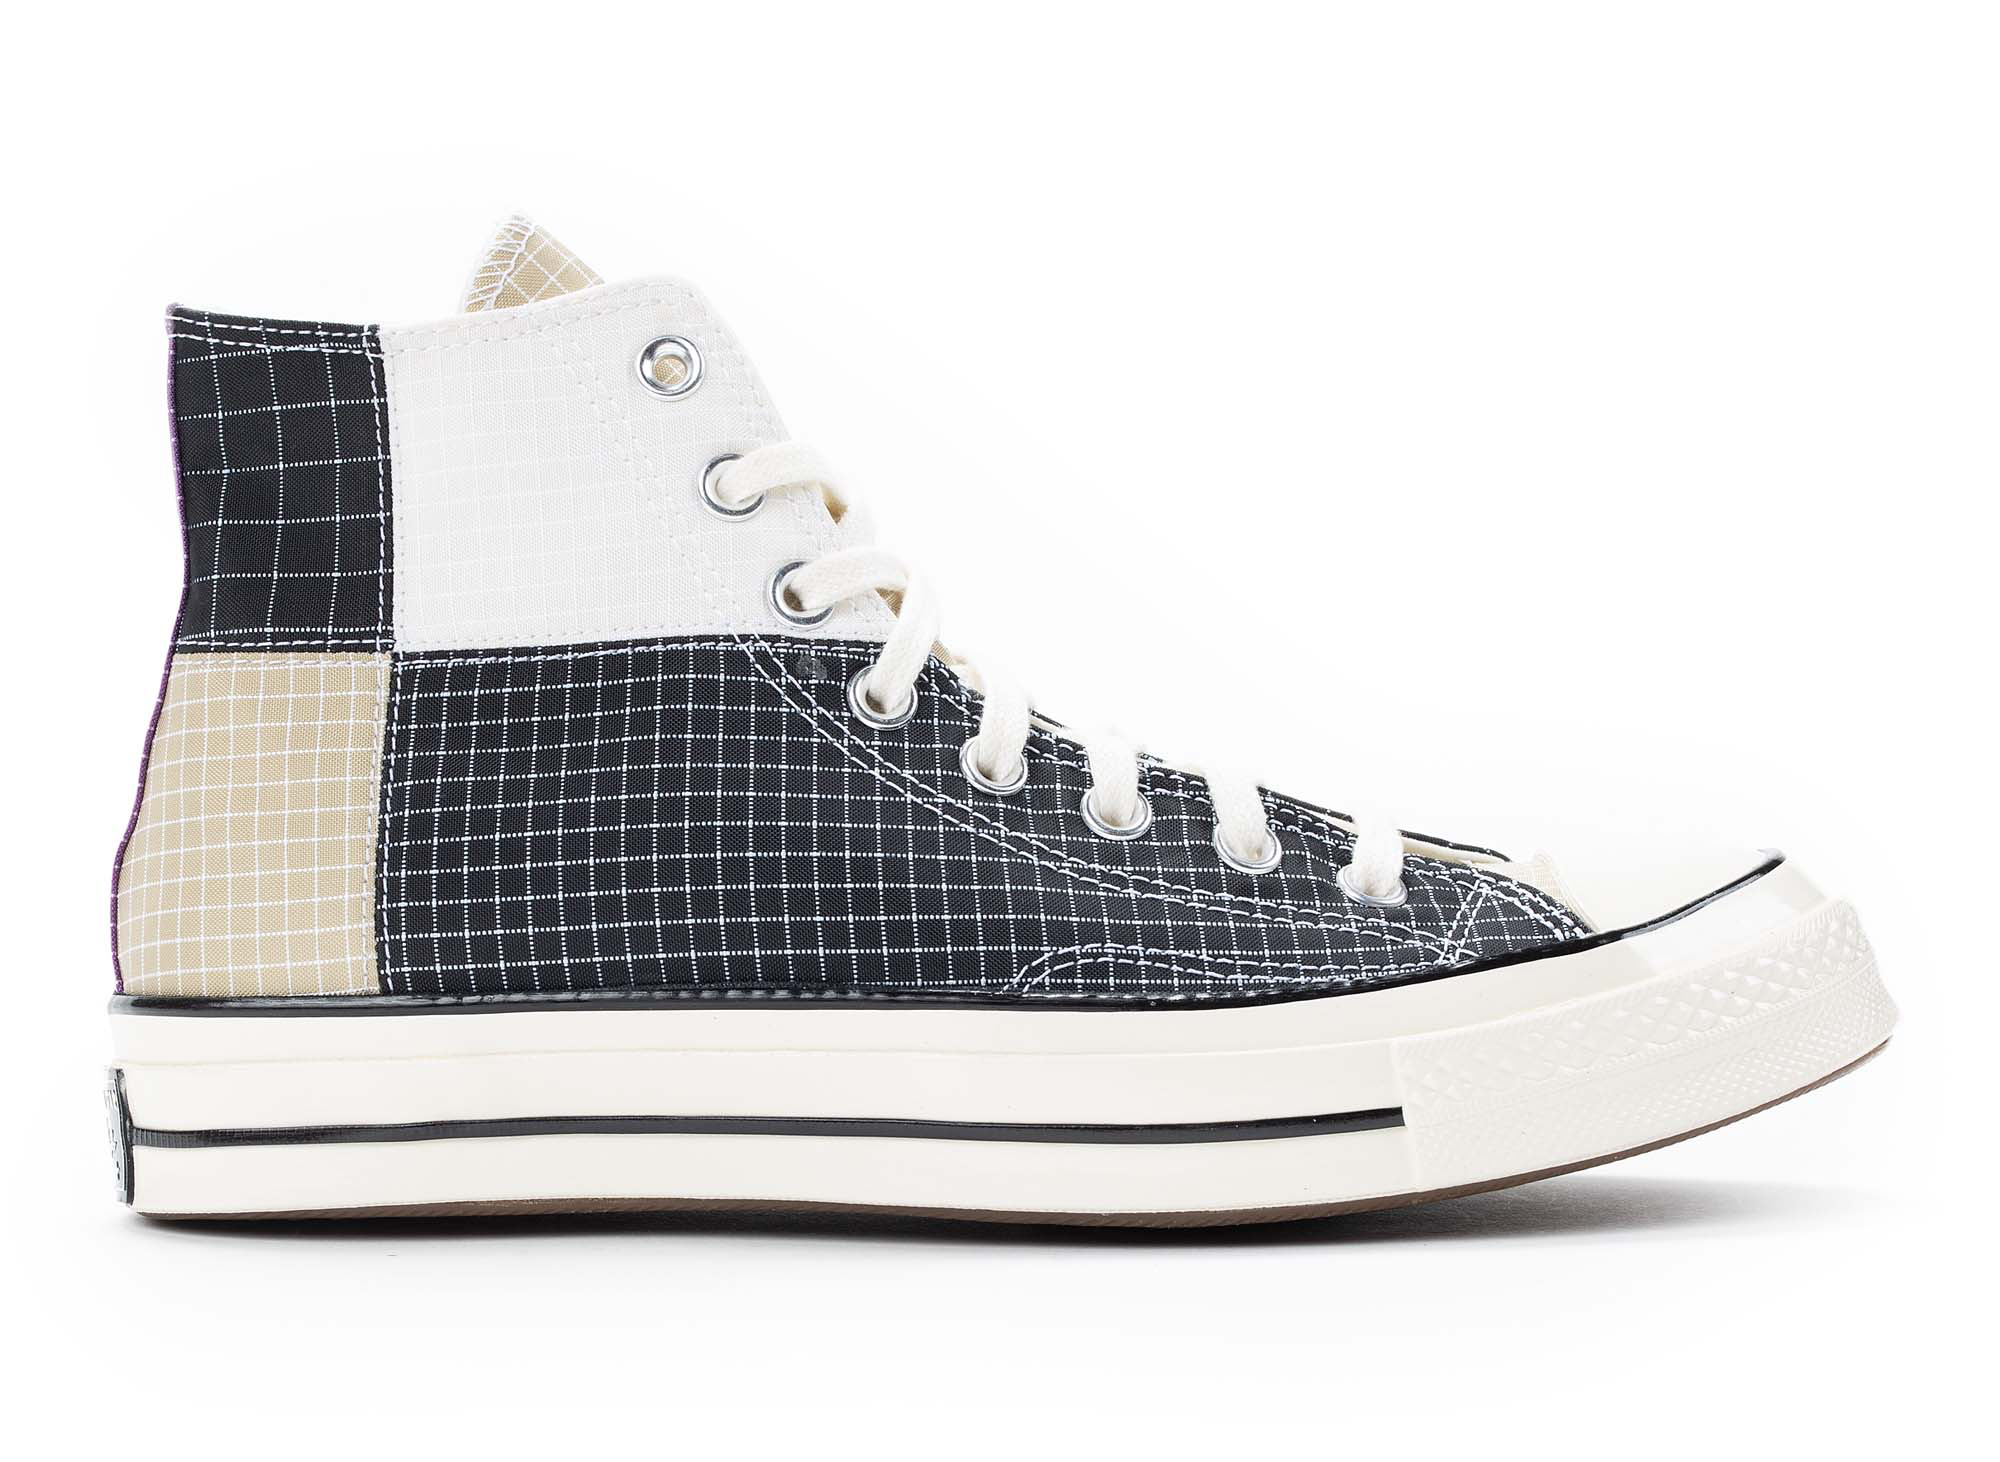 converse oyster gray